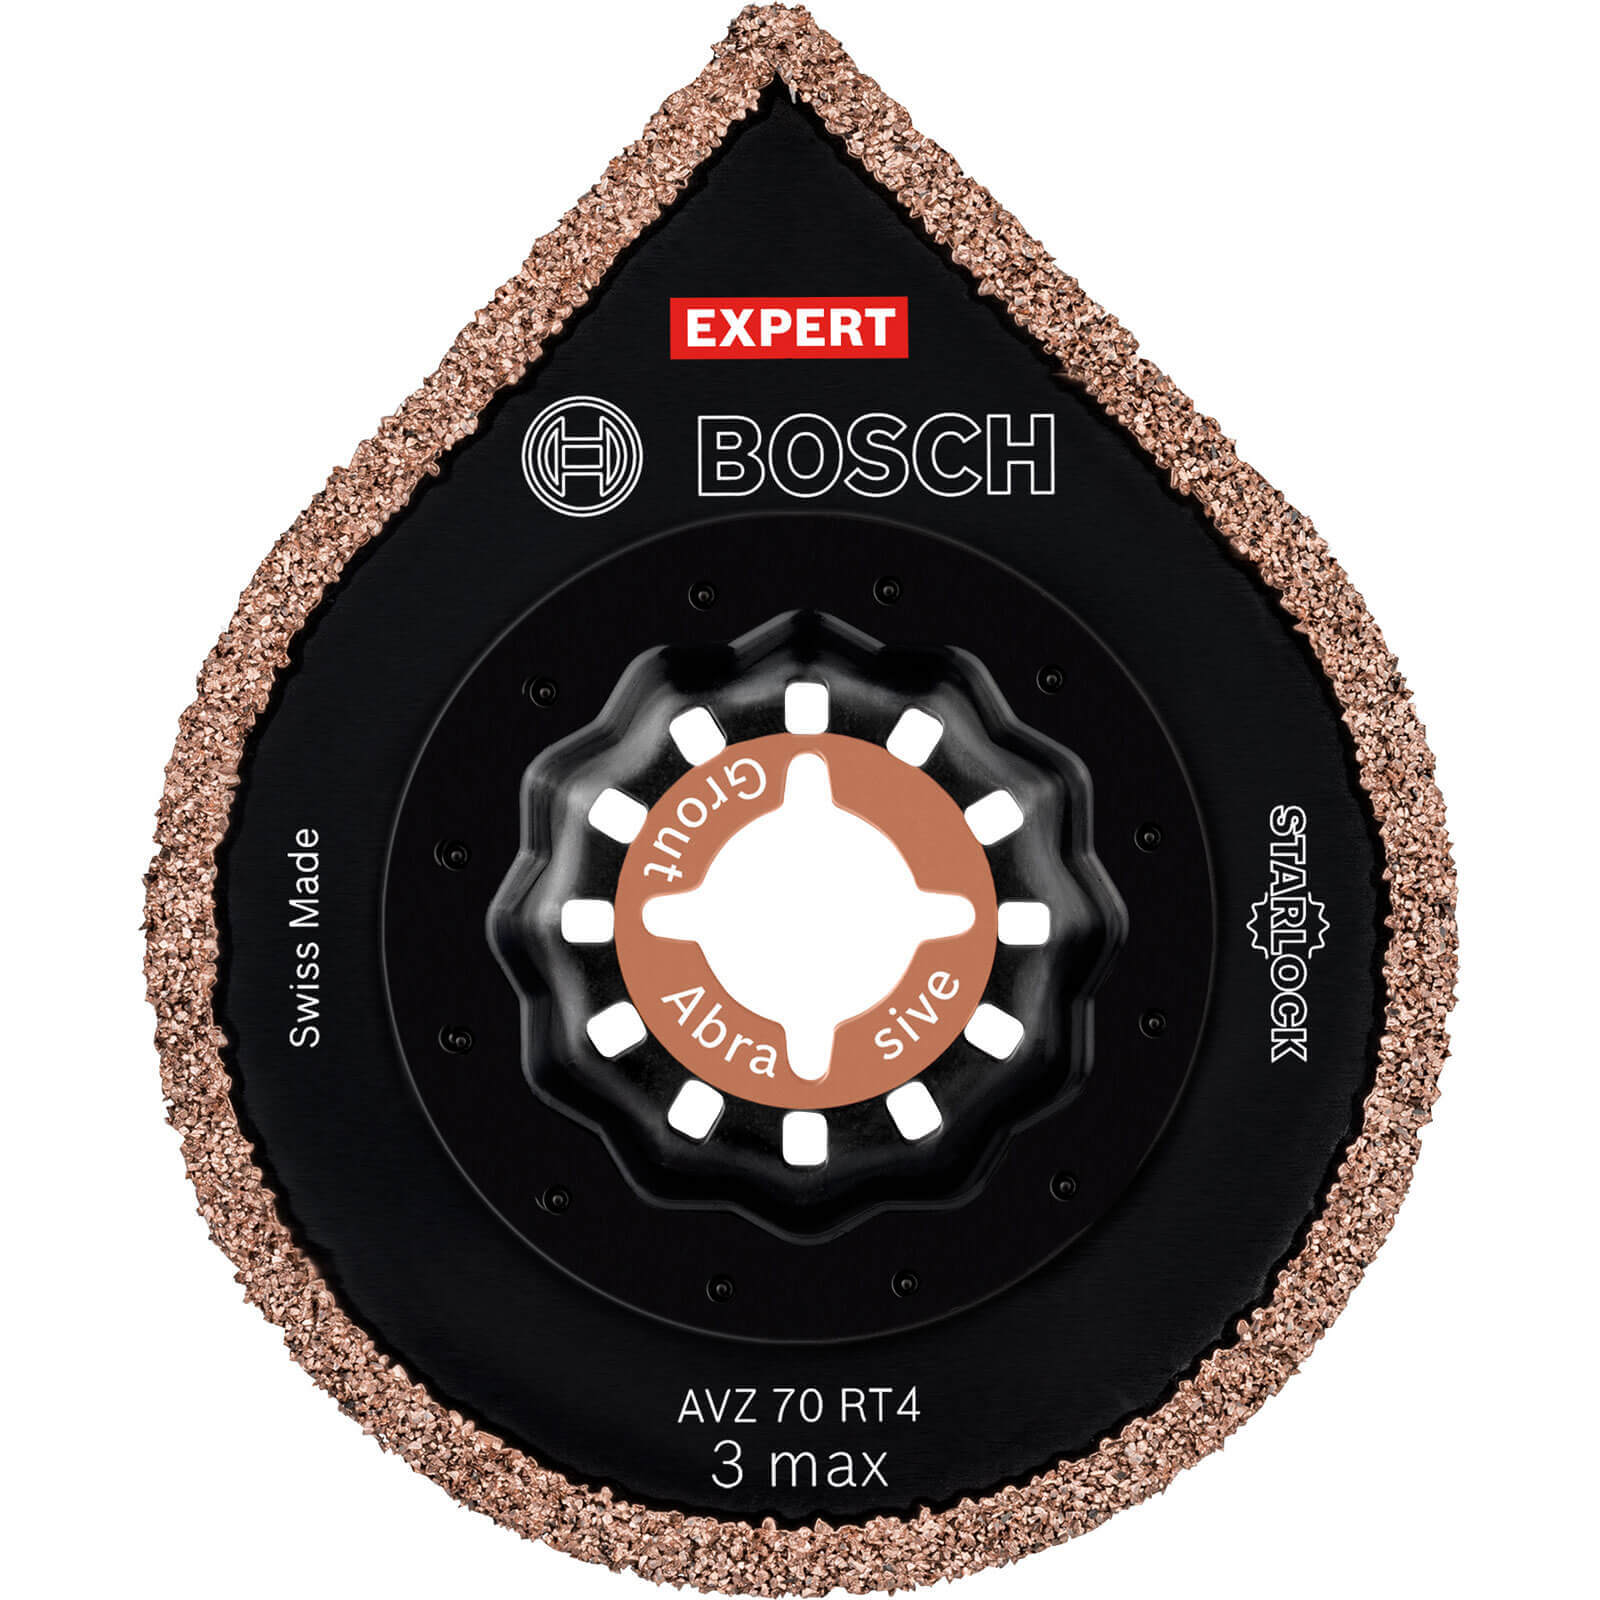 Image of Bosch Expert AVZ 70 RT4 Abrasive and Grout Oscillating Multi Tool Removal Blade 70mm Pack of 10